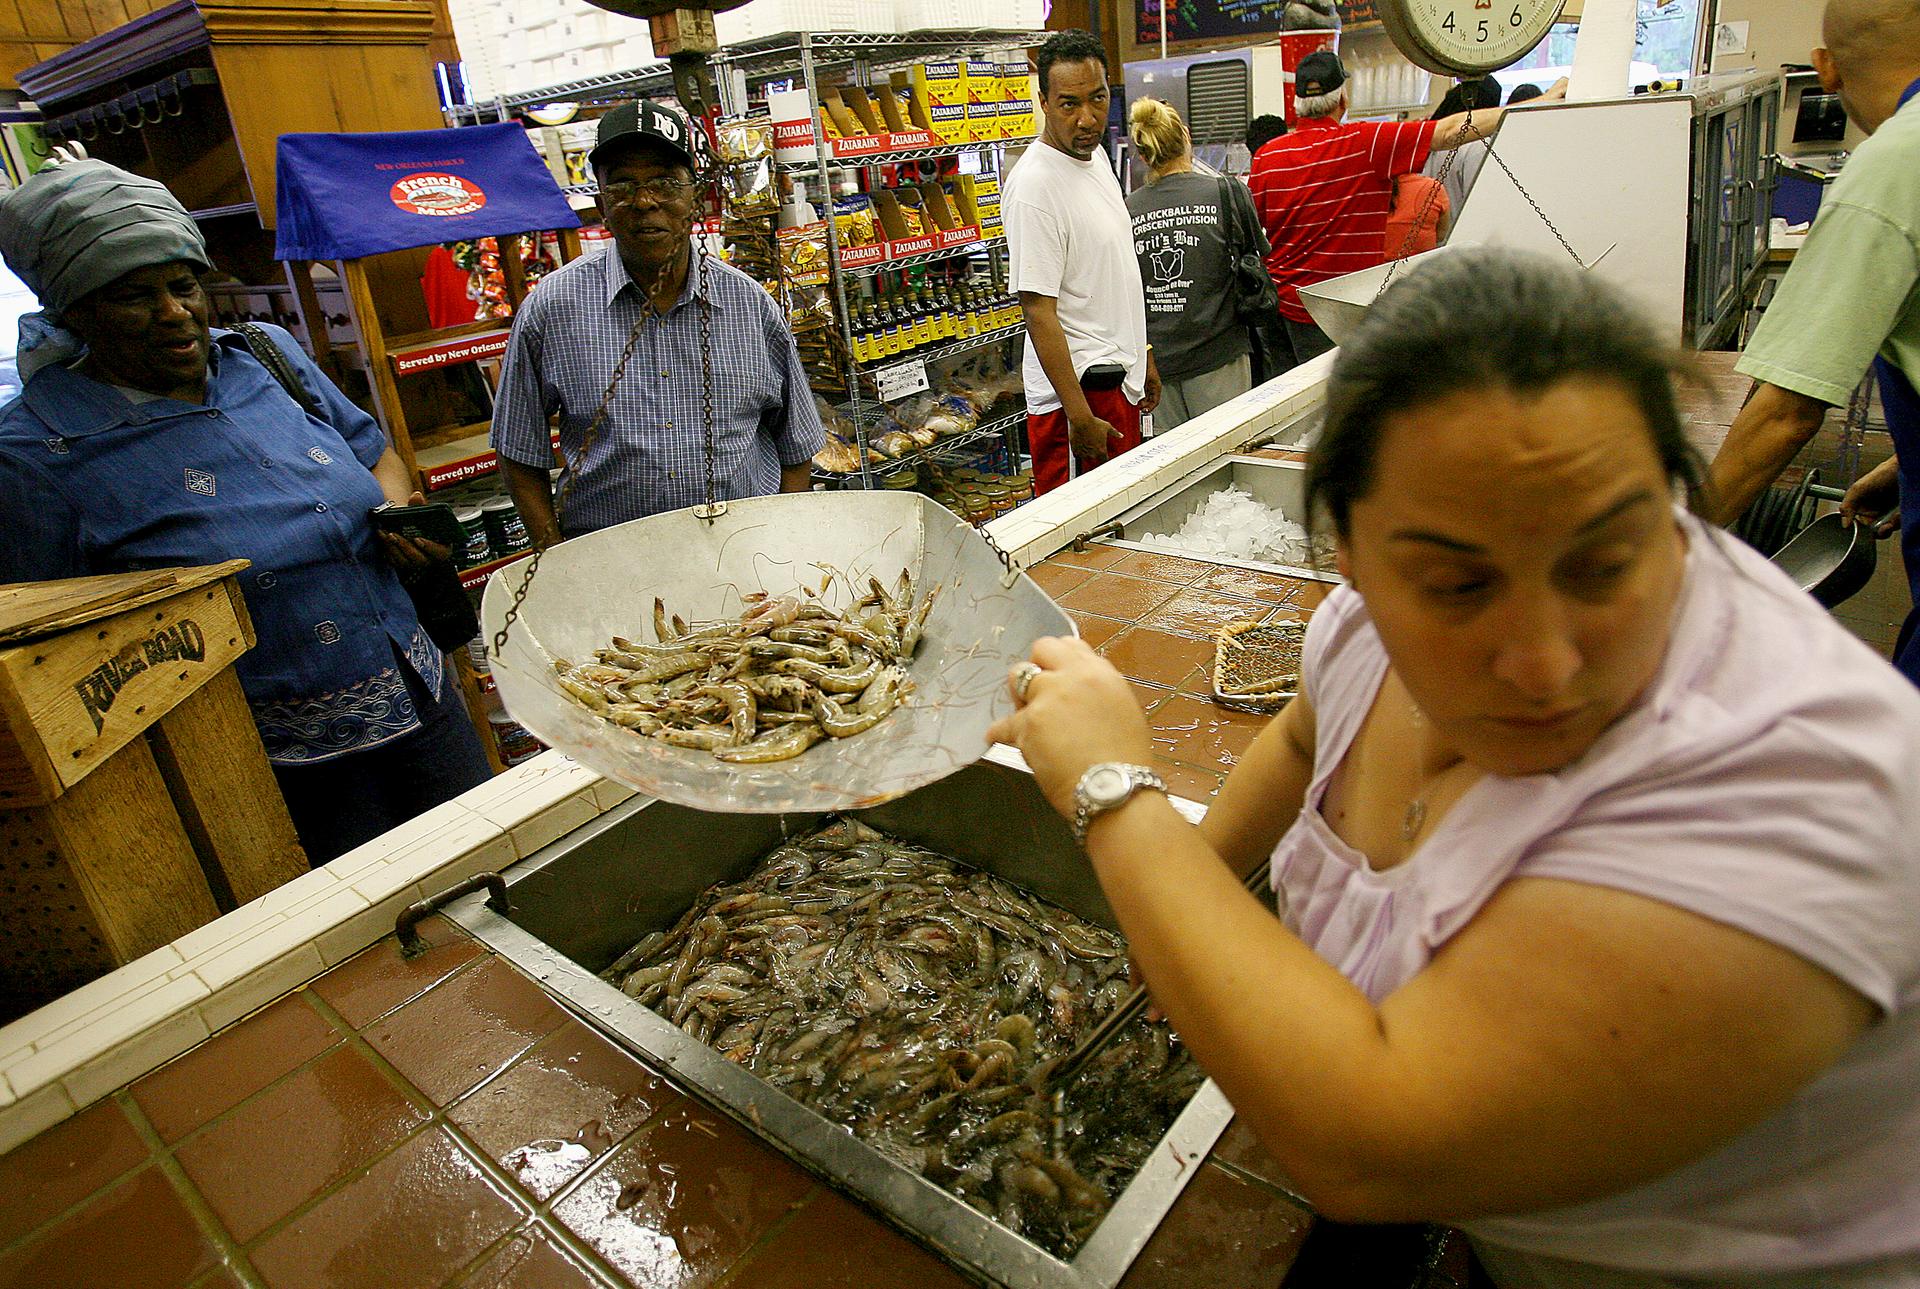 Chandra Chifici at Deanie's Seafood weighs shrimp for customers in Metairie, Louisiana, in 2010.